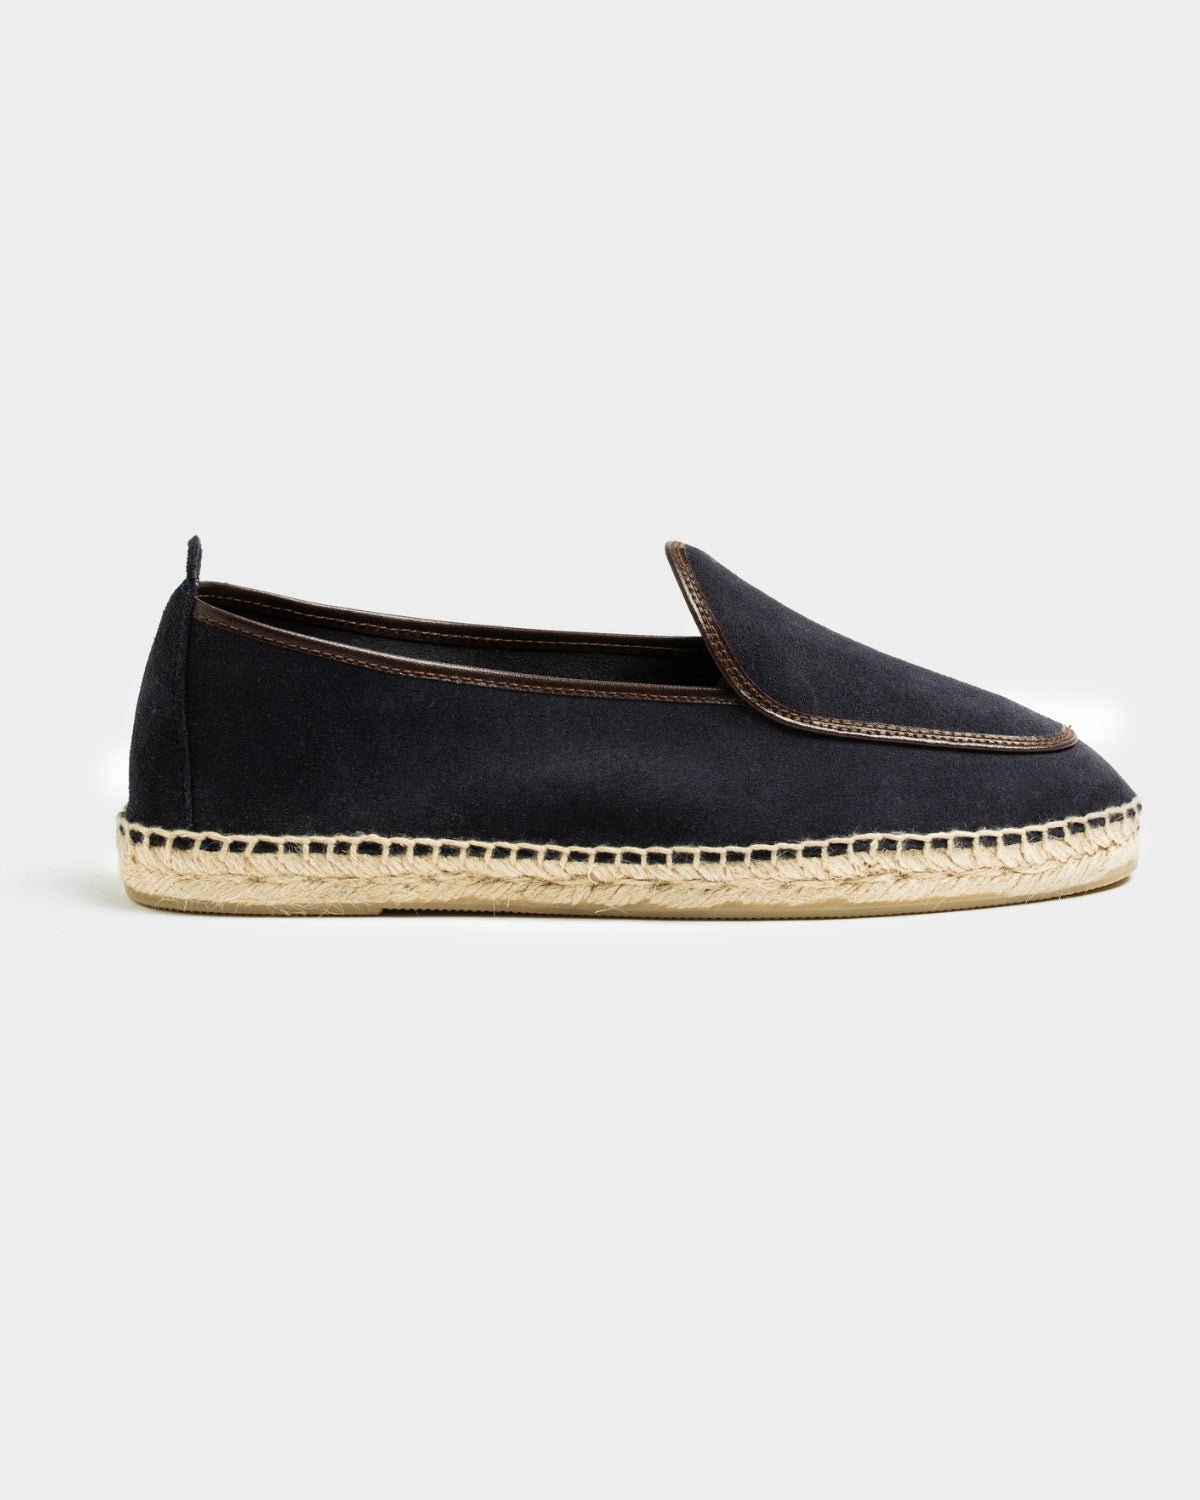 Espadrilles Belgian Loafer Style Navy Suede - THE RESORT CO